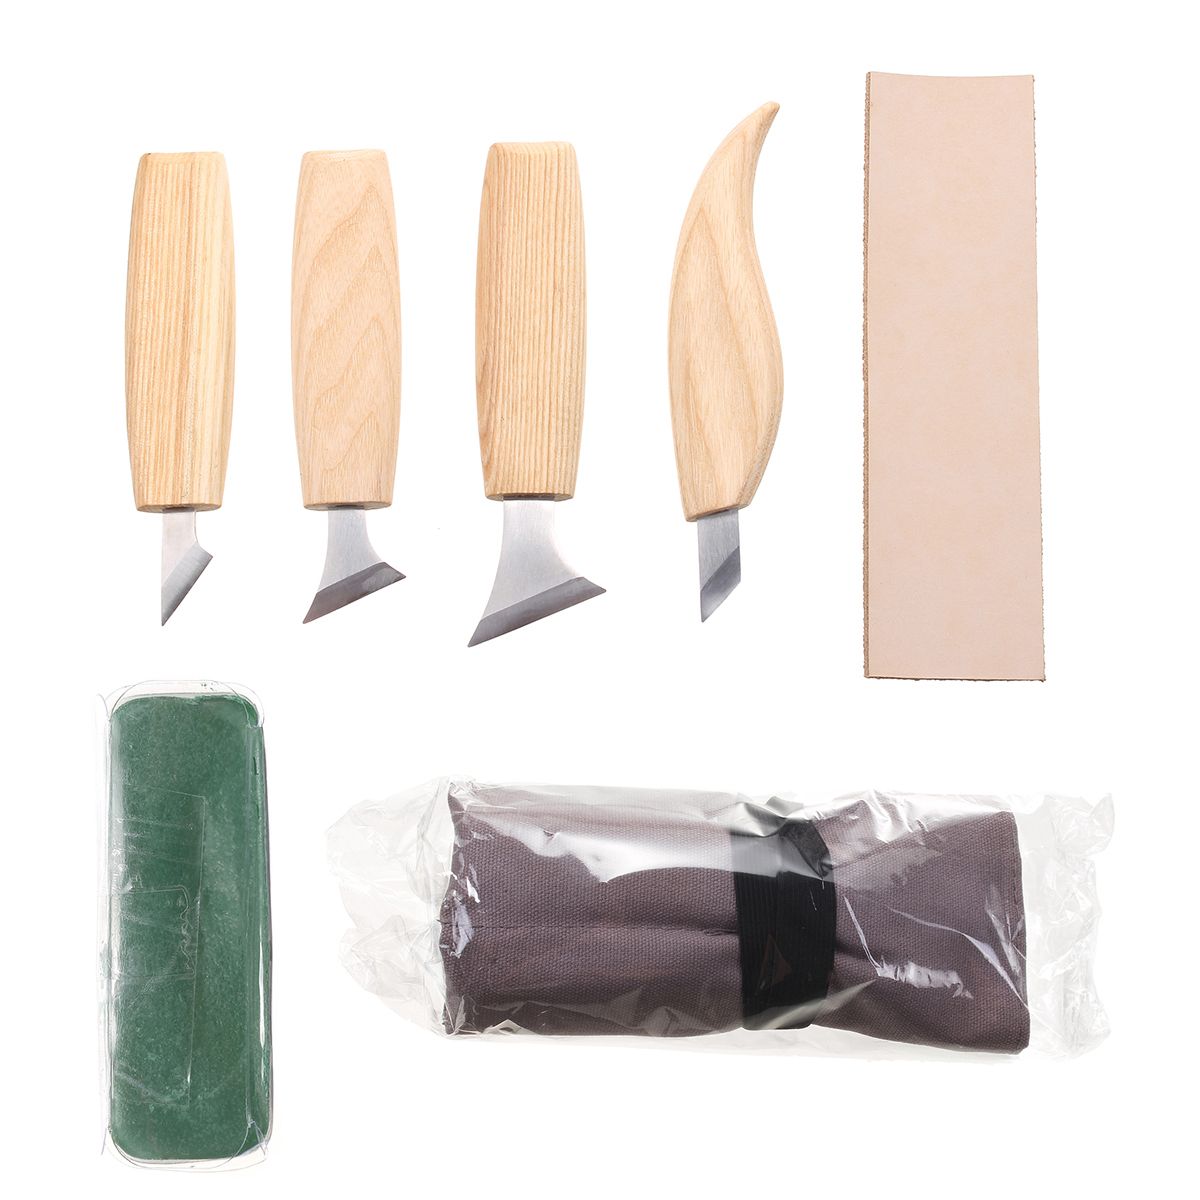 7Pcs-Wood-Carving-Cutter-Peeling-Curved-Woodwork-Sculptural-Carving-Tool-Set-1608028